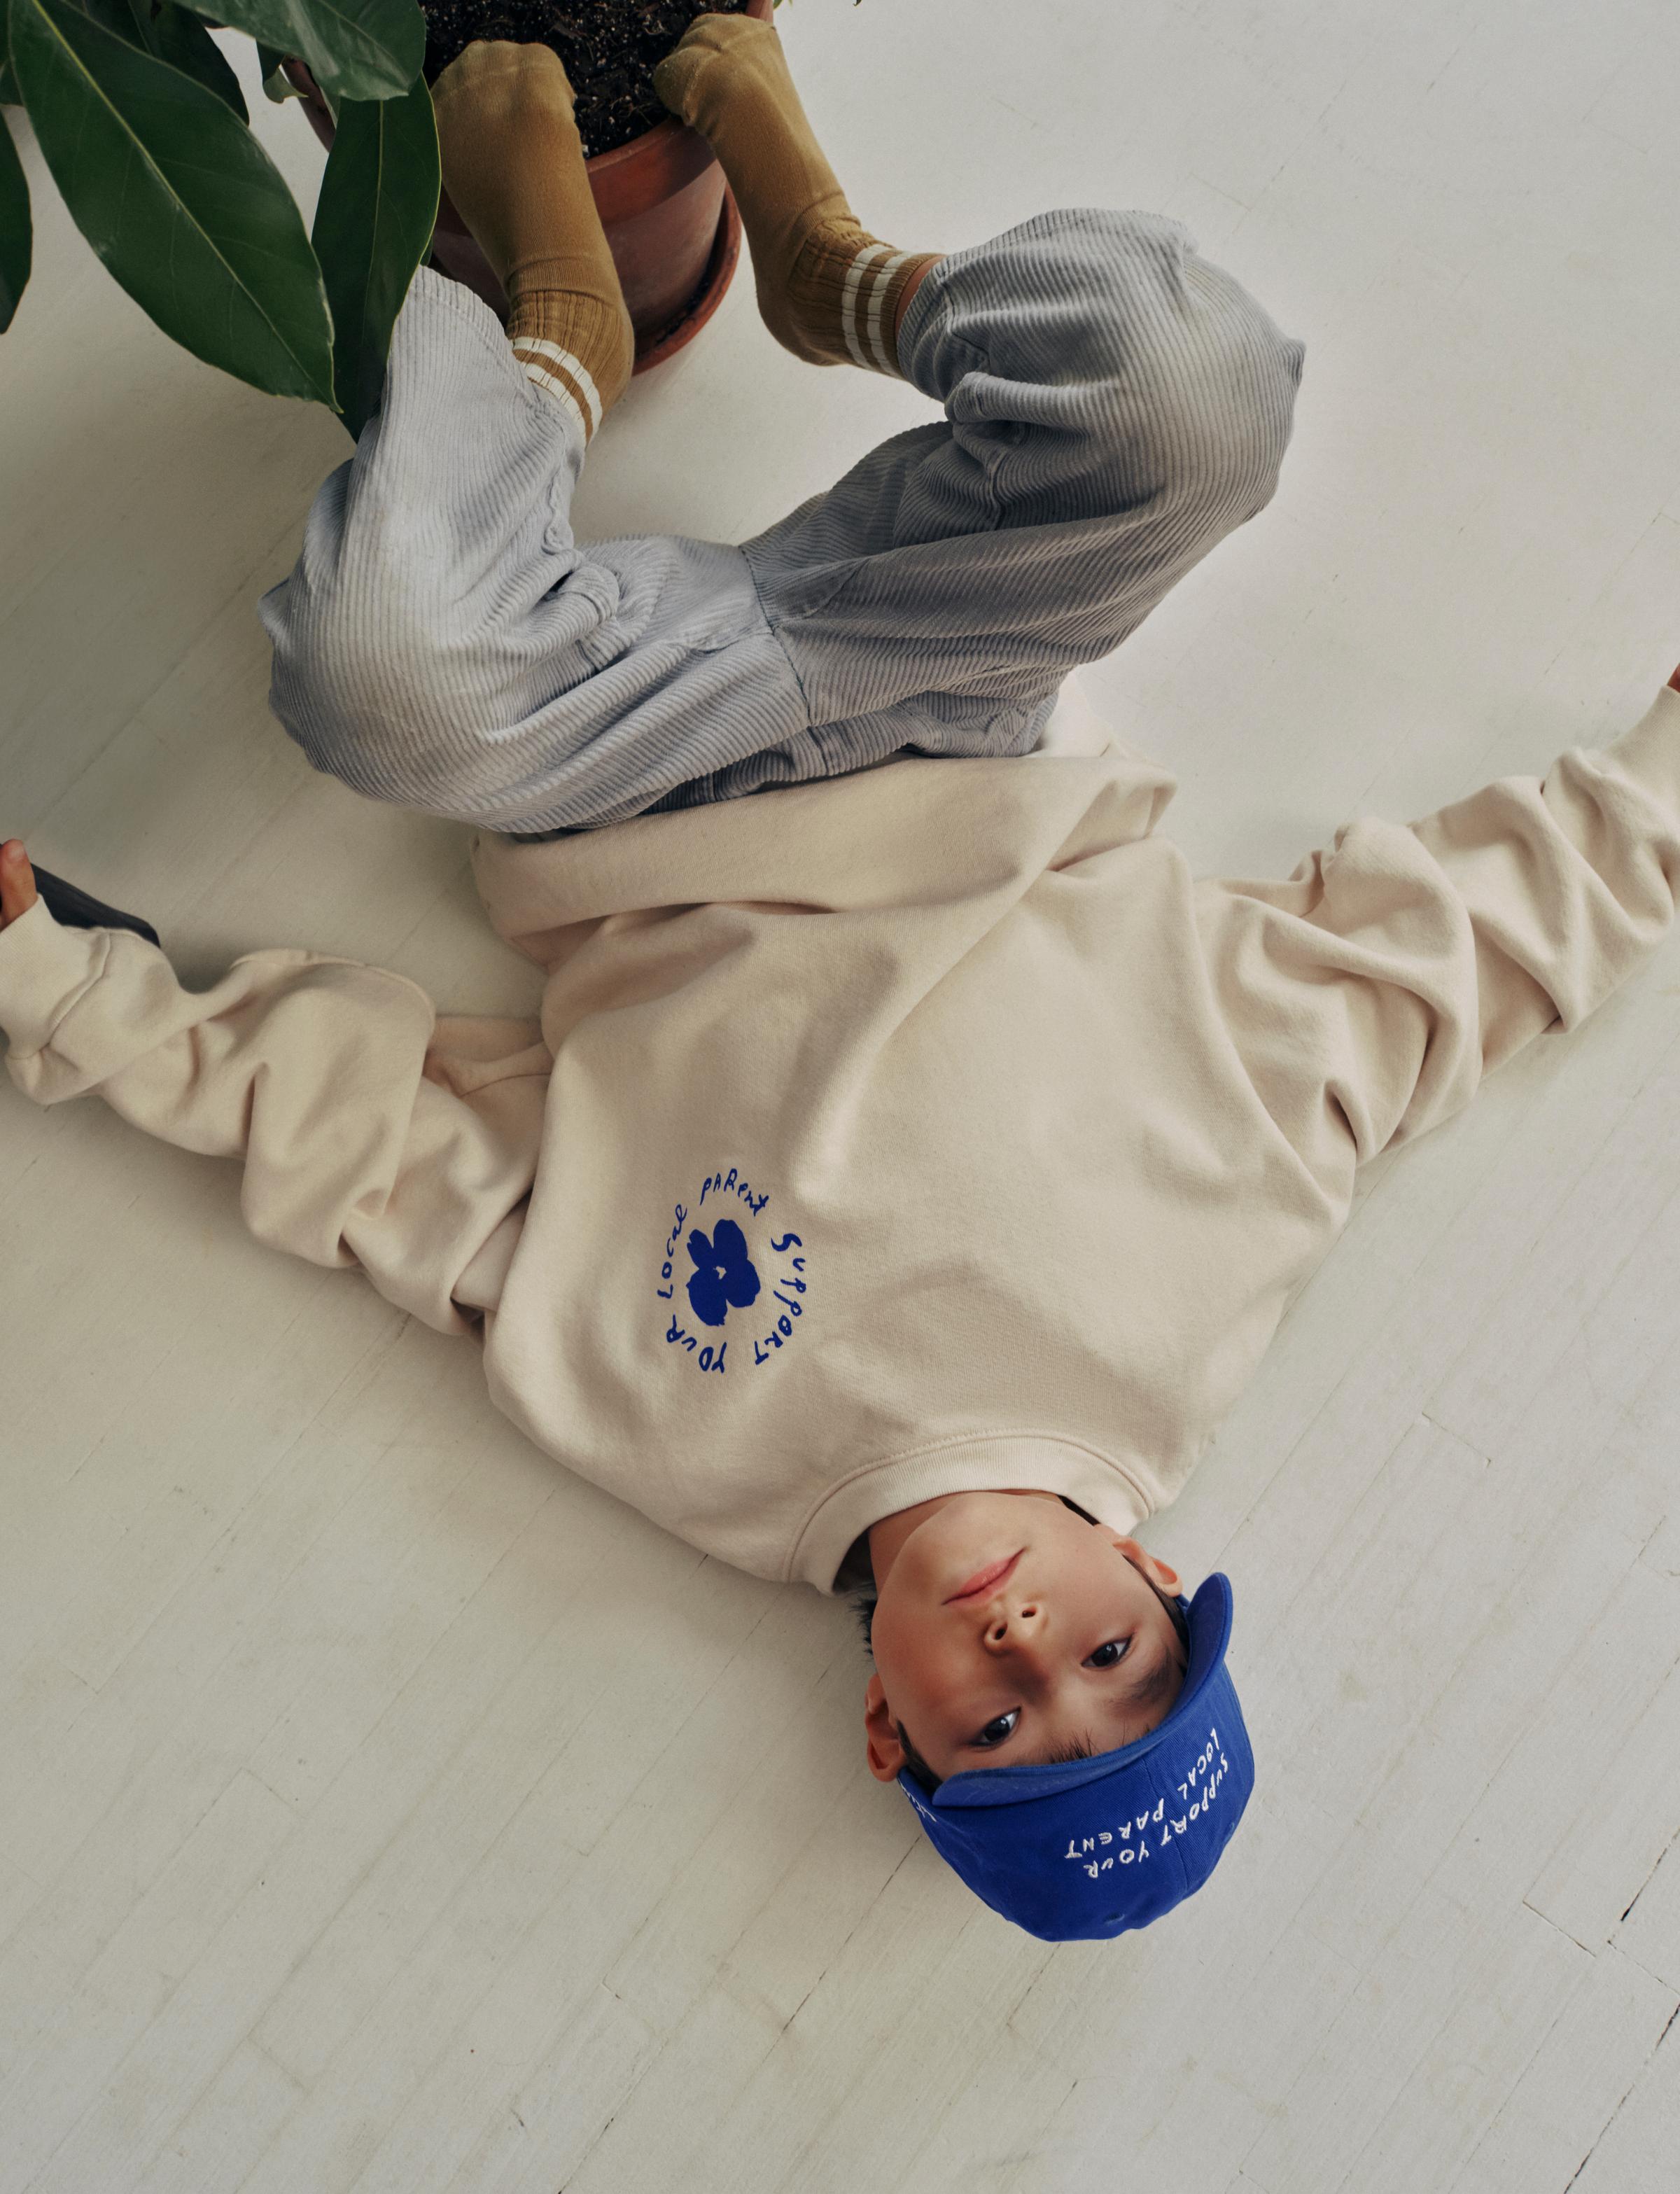 A child lays on the floor in an oversized SYLP crewneck and electric blue hat.